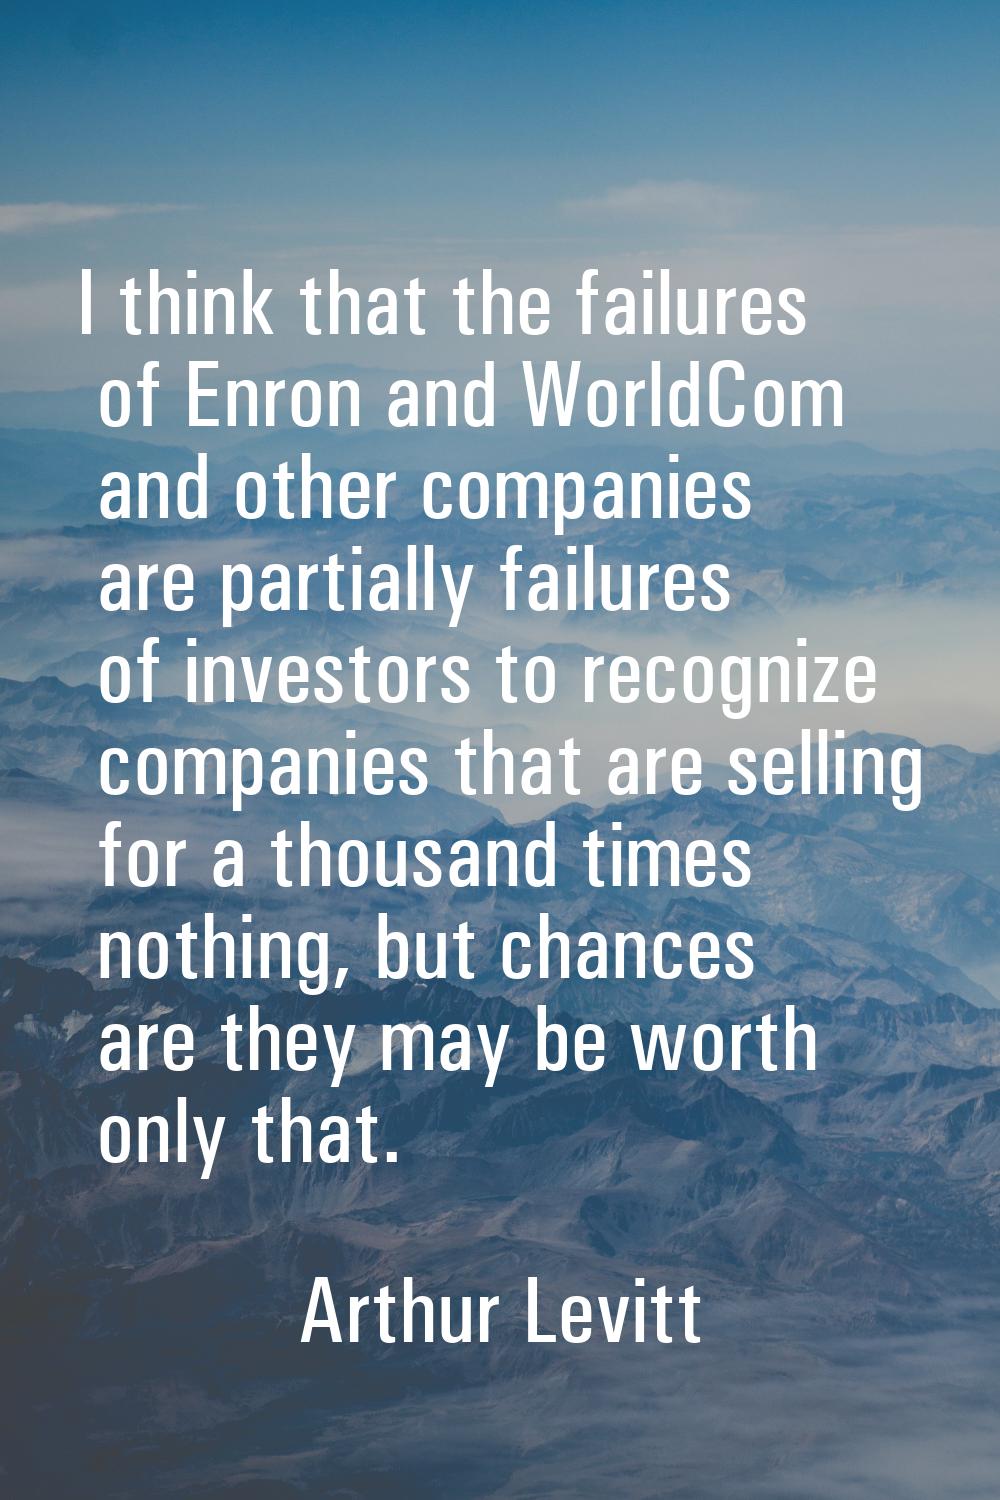 I think that the failures of Enron and WorldCom and other companies are partially failures of inves